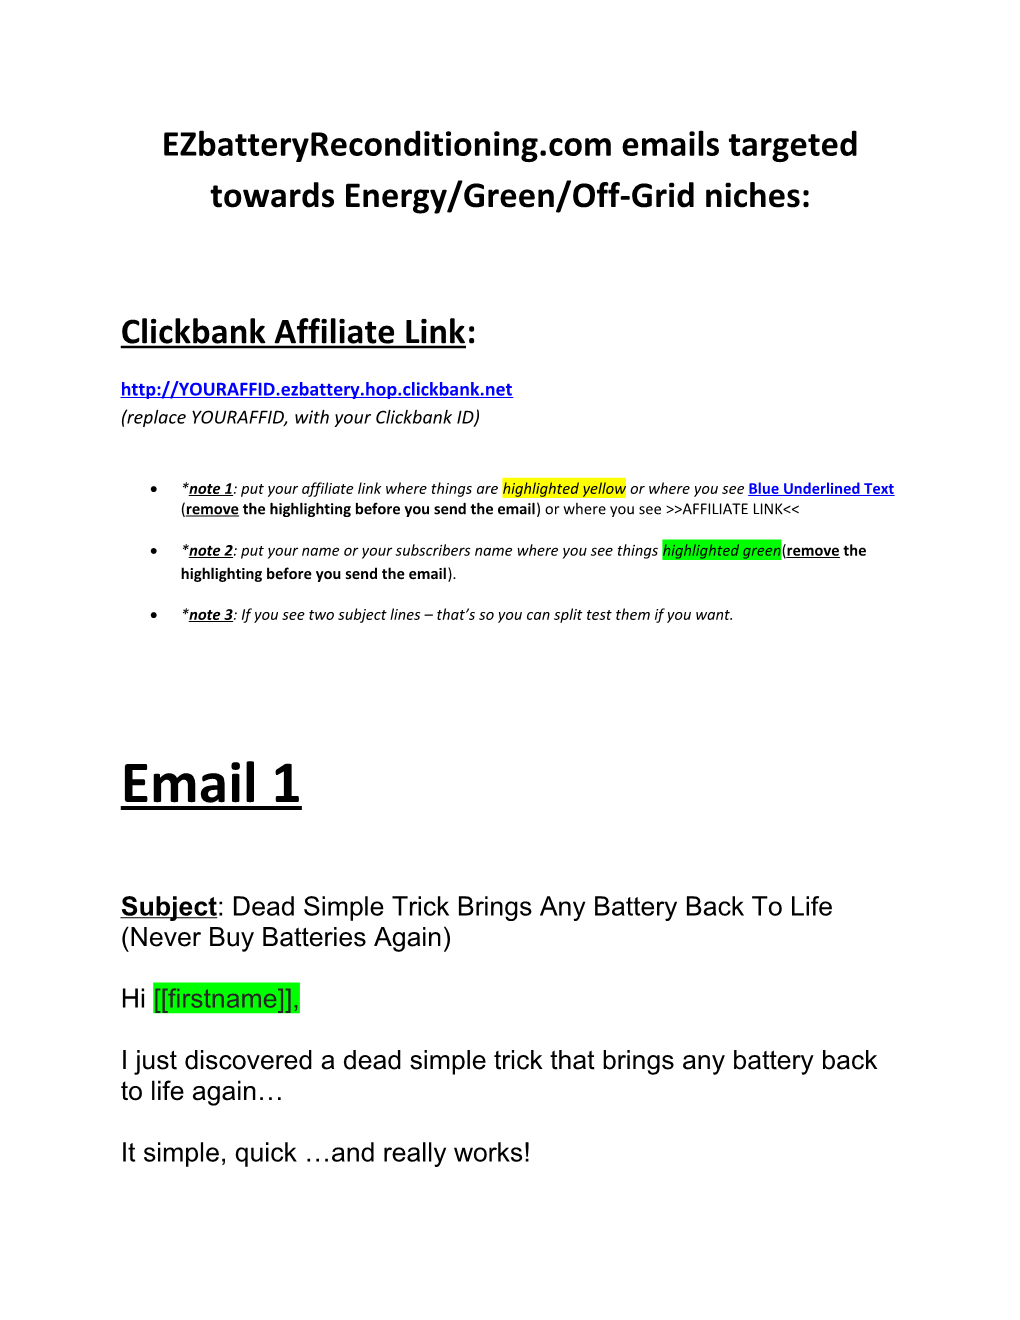 Ezbatteryreconditioning.Com Emails Targeted Towards Energy/Green/Off-Grid Niches